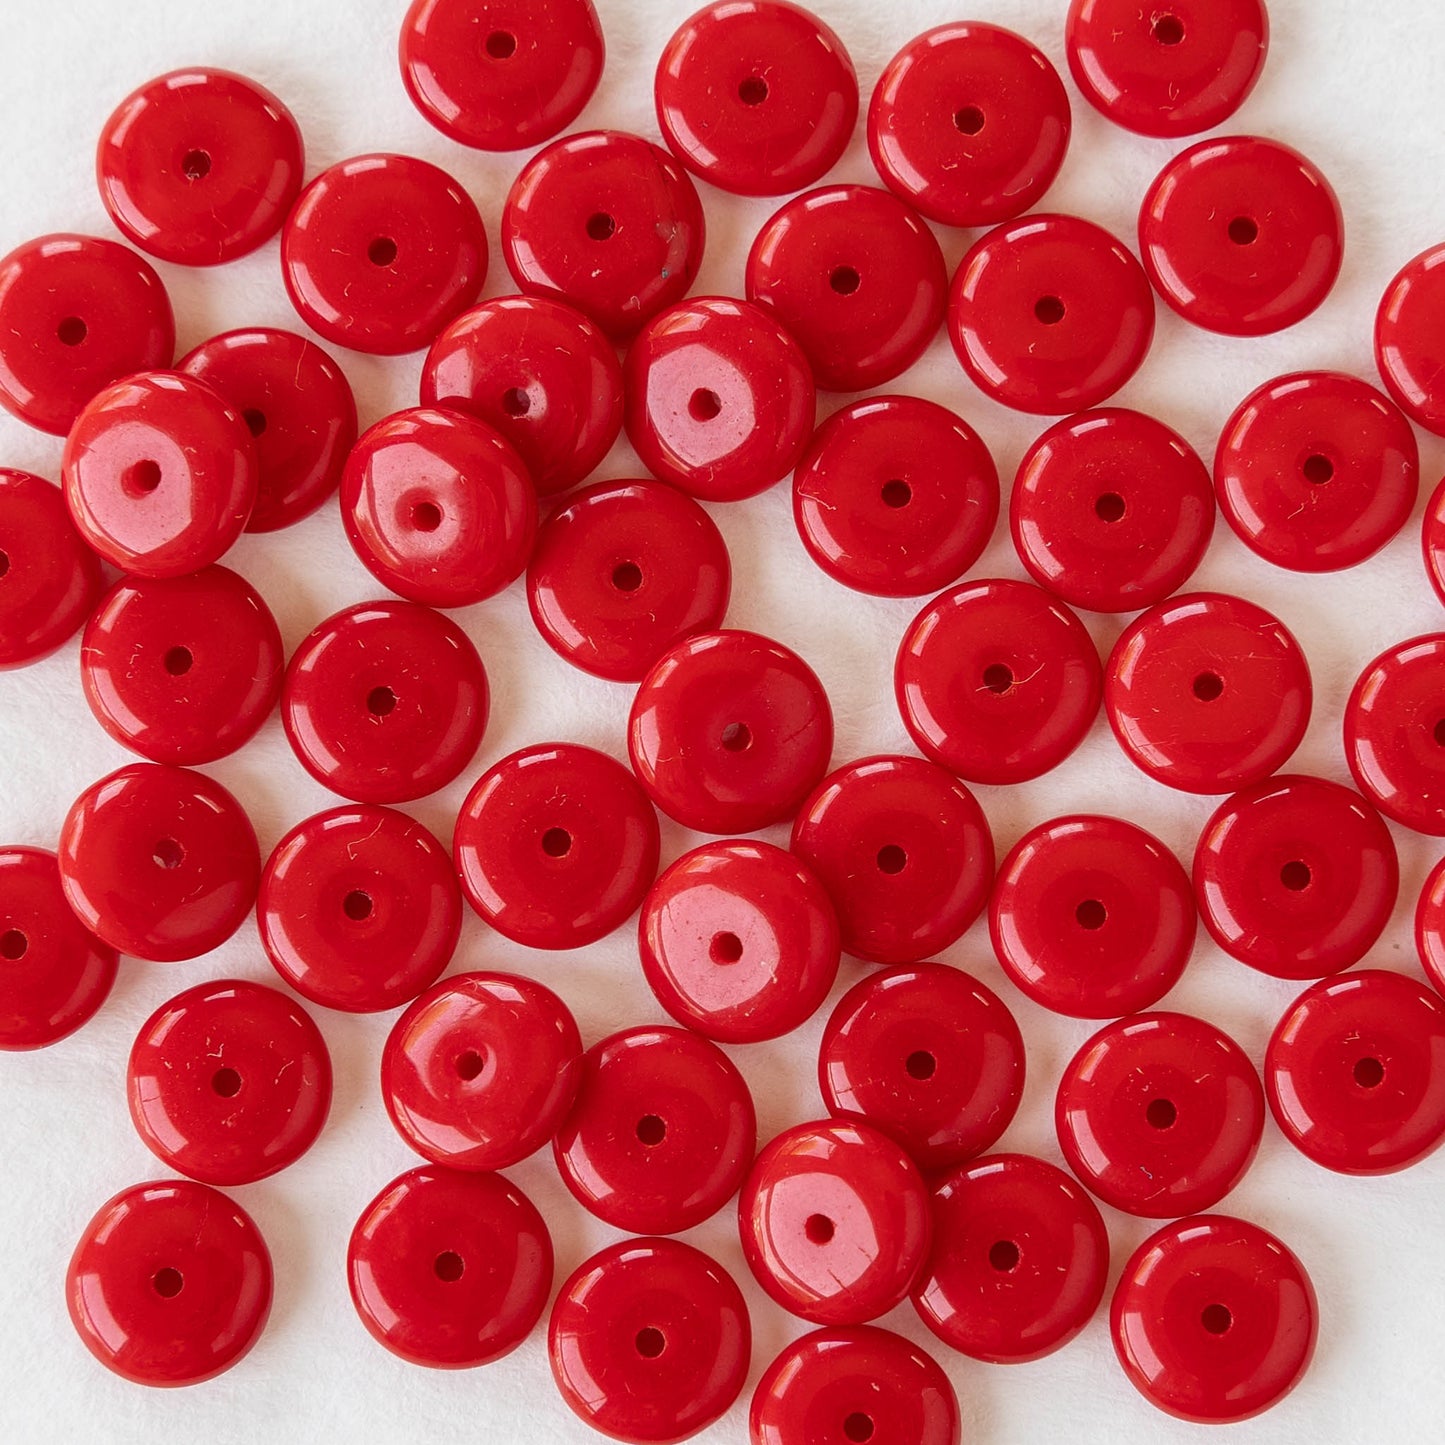 8mm Rondelle Beads - Opaque Red - 30 Beads